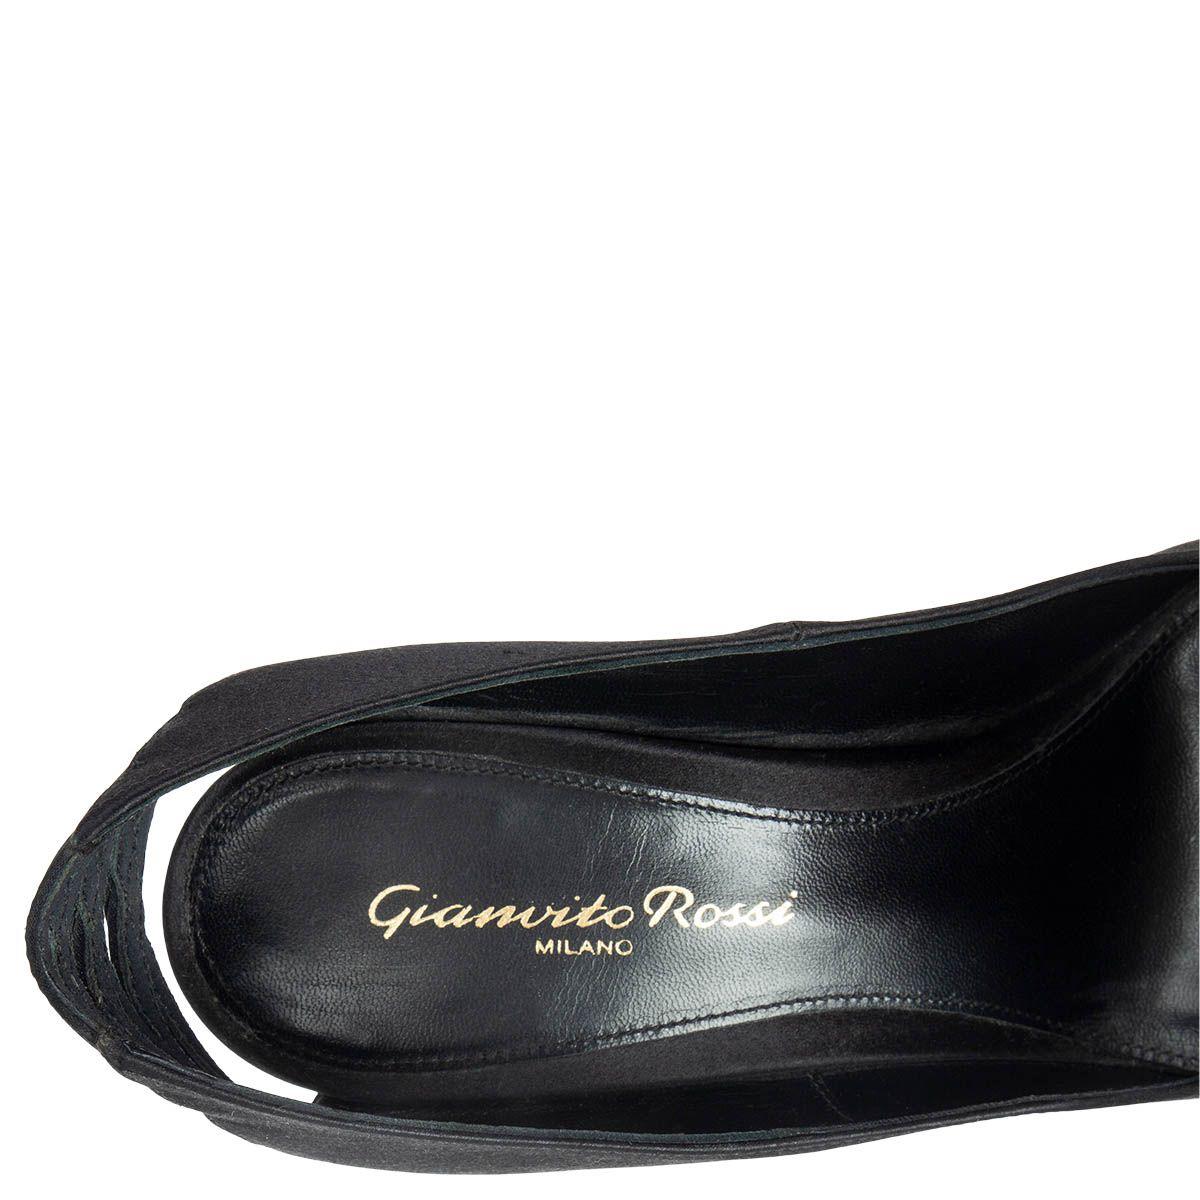 GIANVITO ROSSI black SATIN Pointed Toe Pumps Shoes 37 For Sale 1